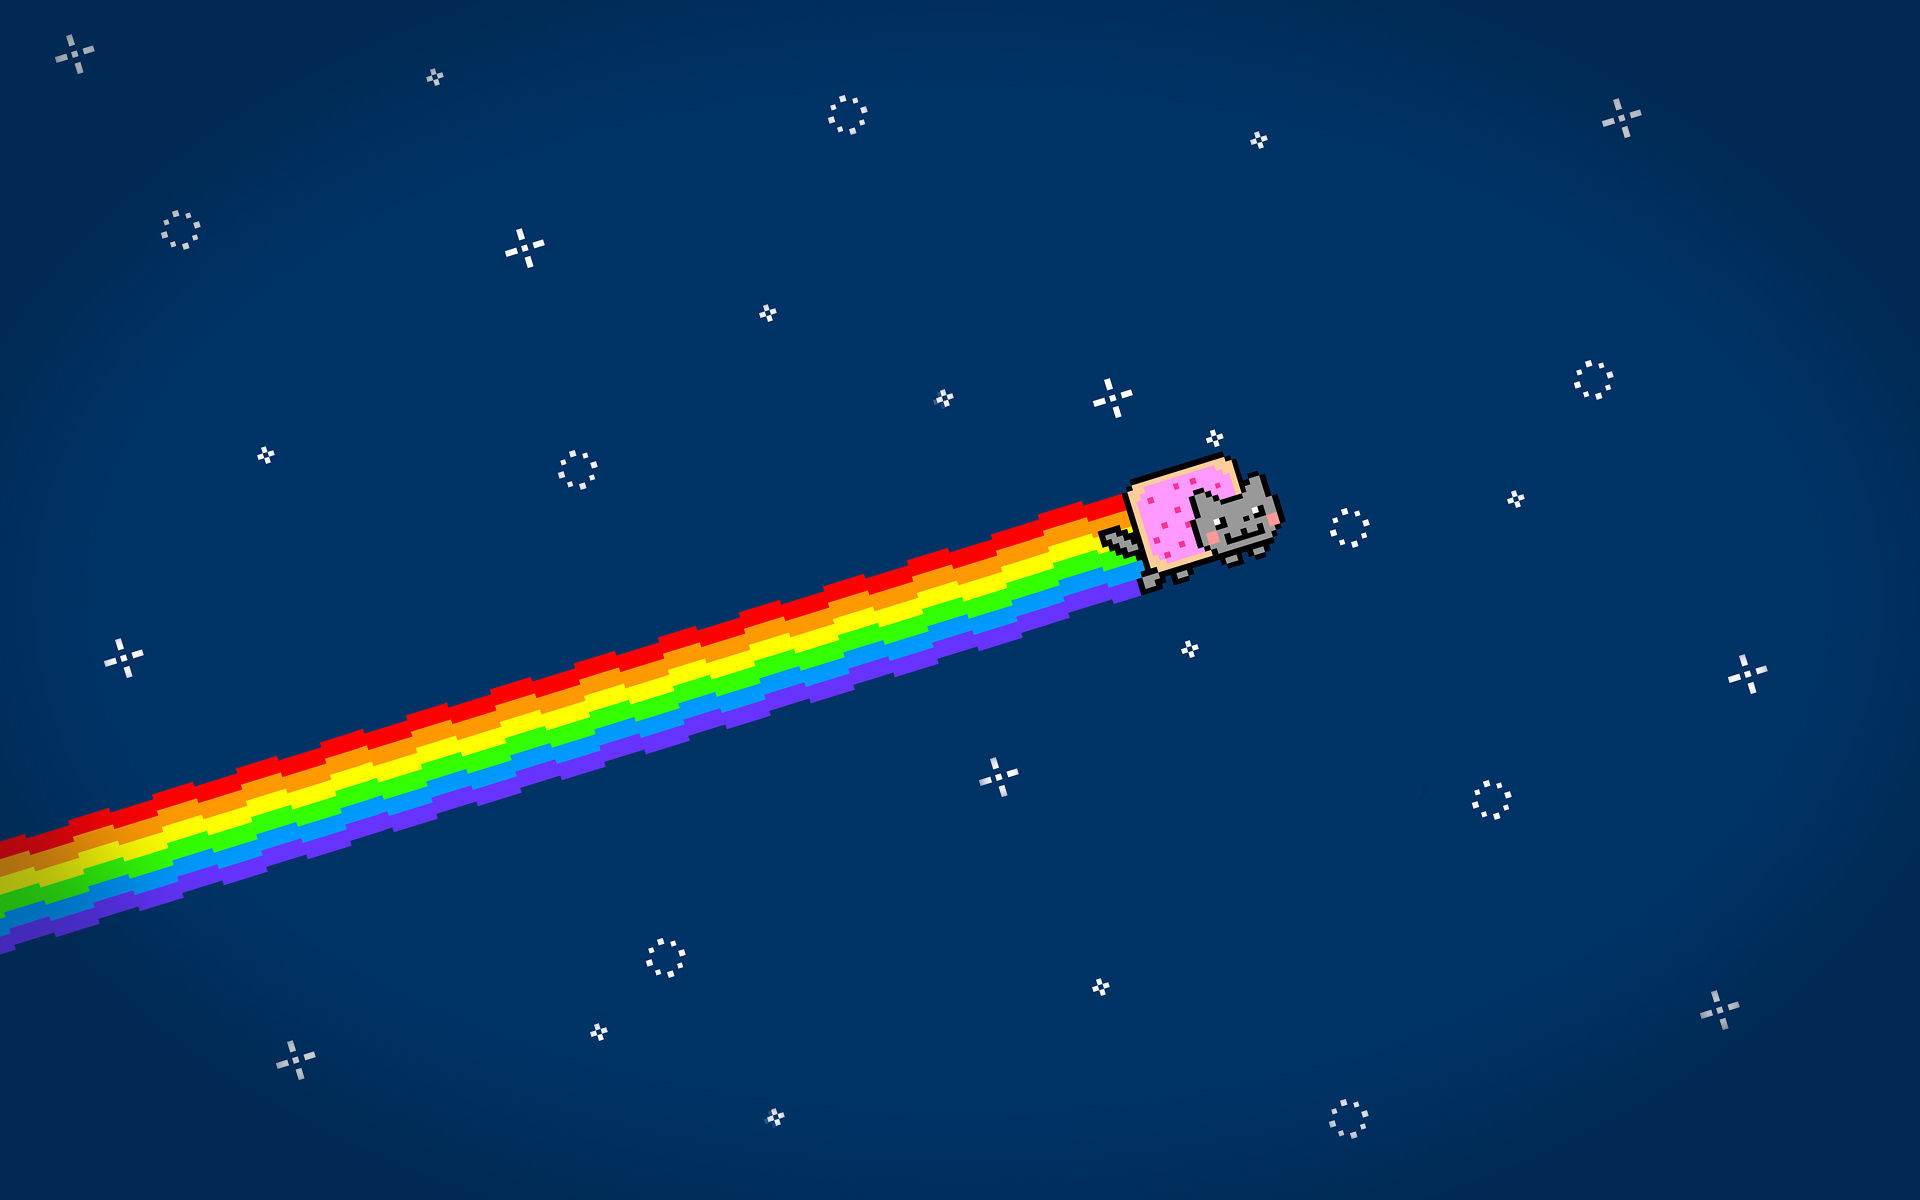 Bot a unicorn, but awesome just the same Nyan Cat pop tart space